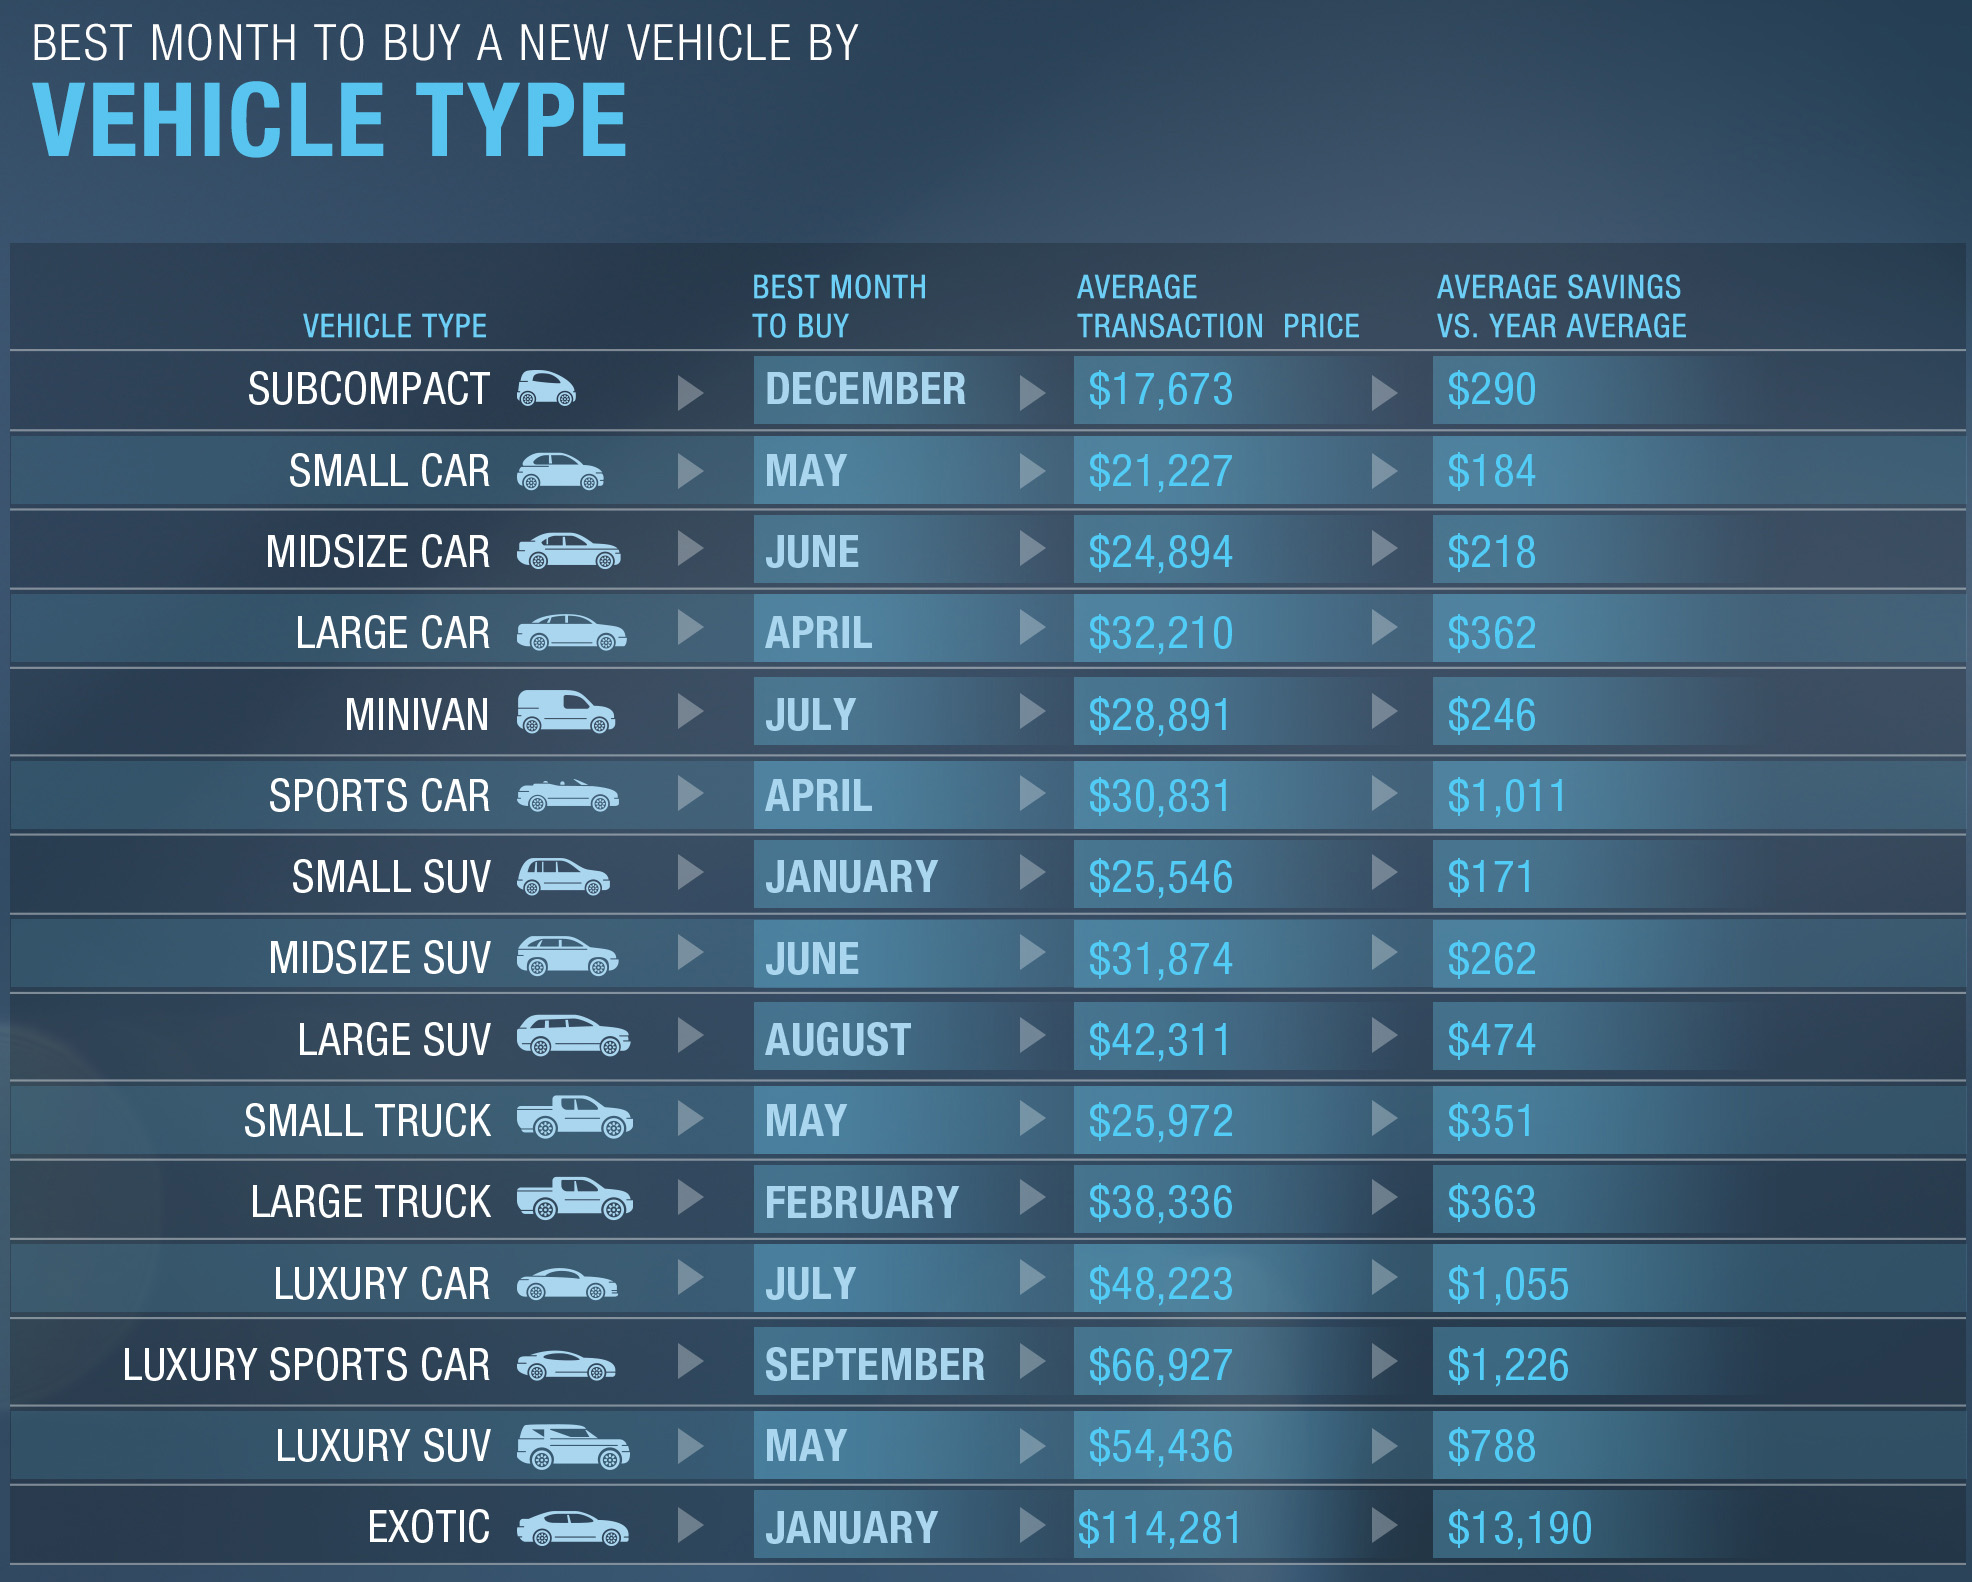 AUGUST IS THE BEST MONTH TO BUY A NEW CAR ACCORDING TO TRUECAR